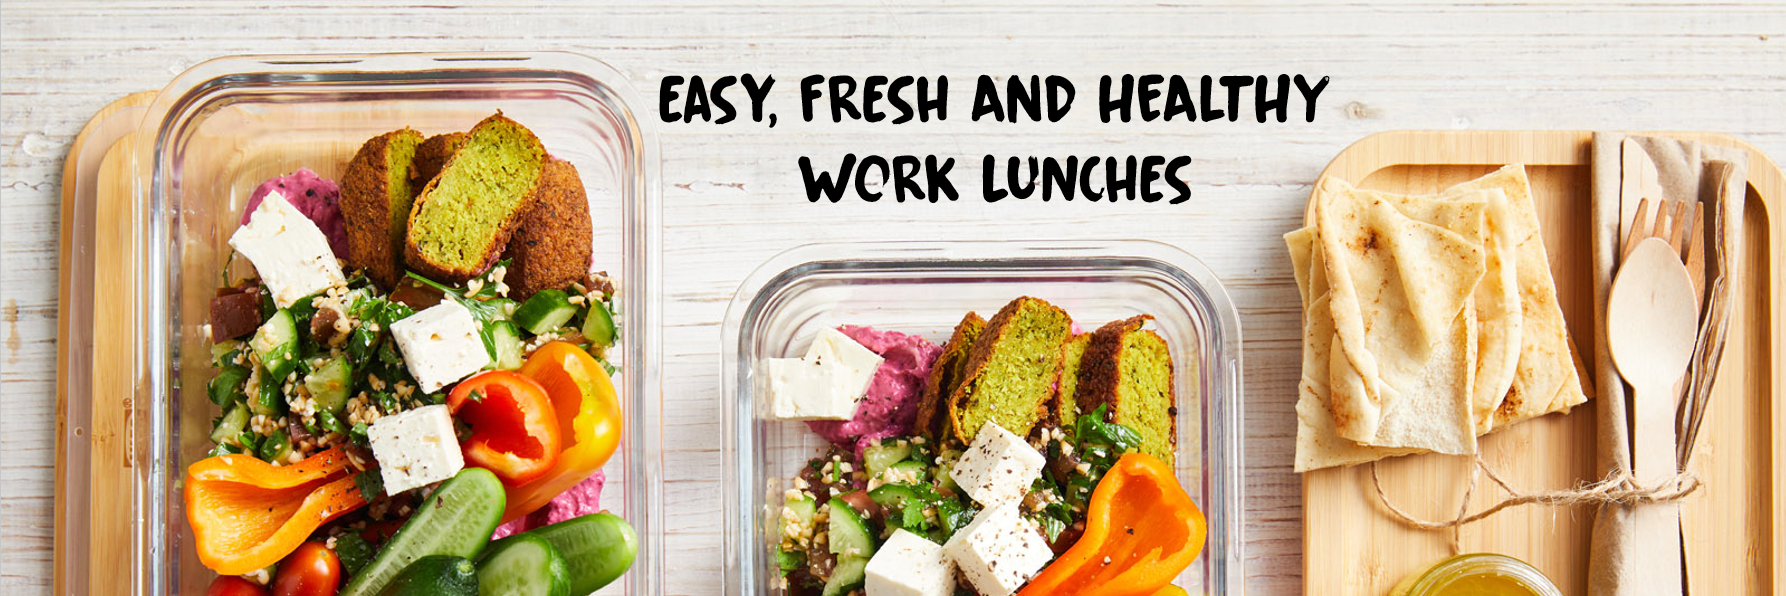 Easy fresh and healthy back to work lunches